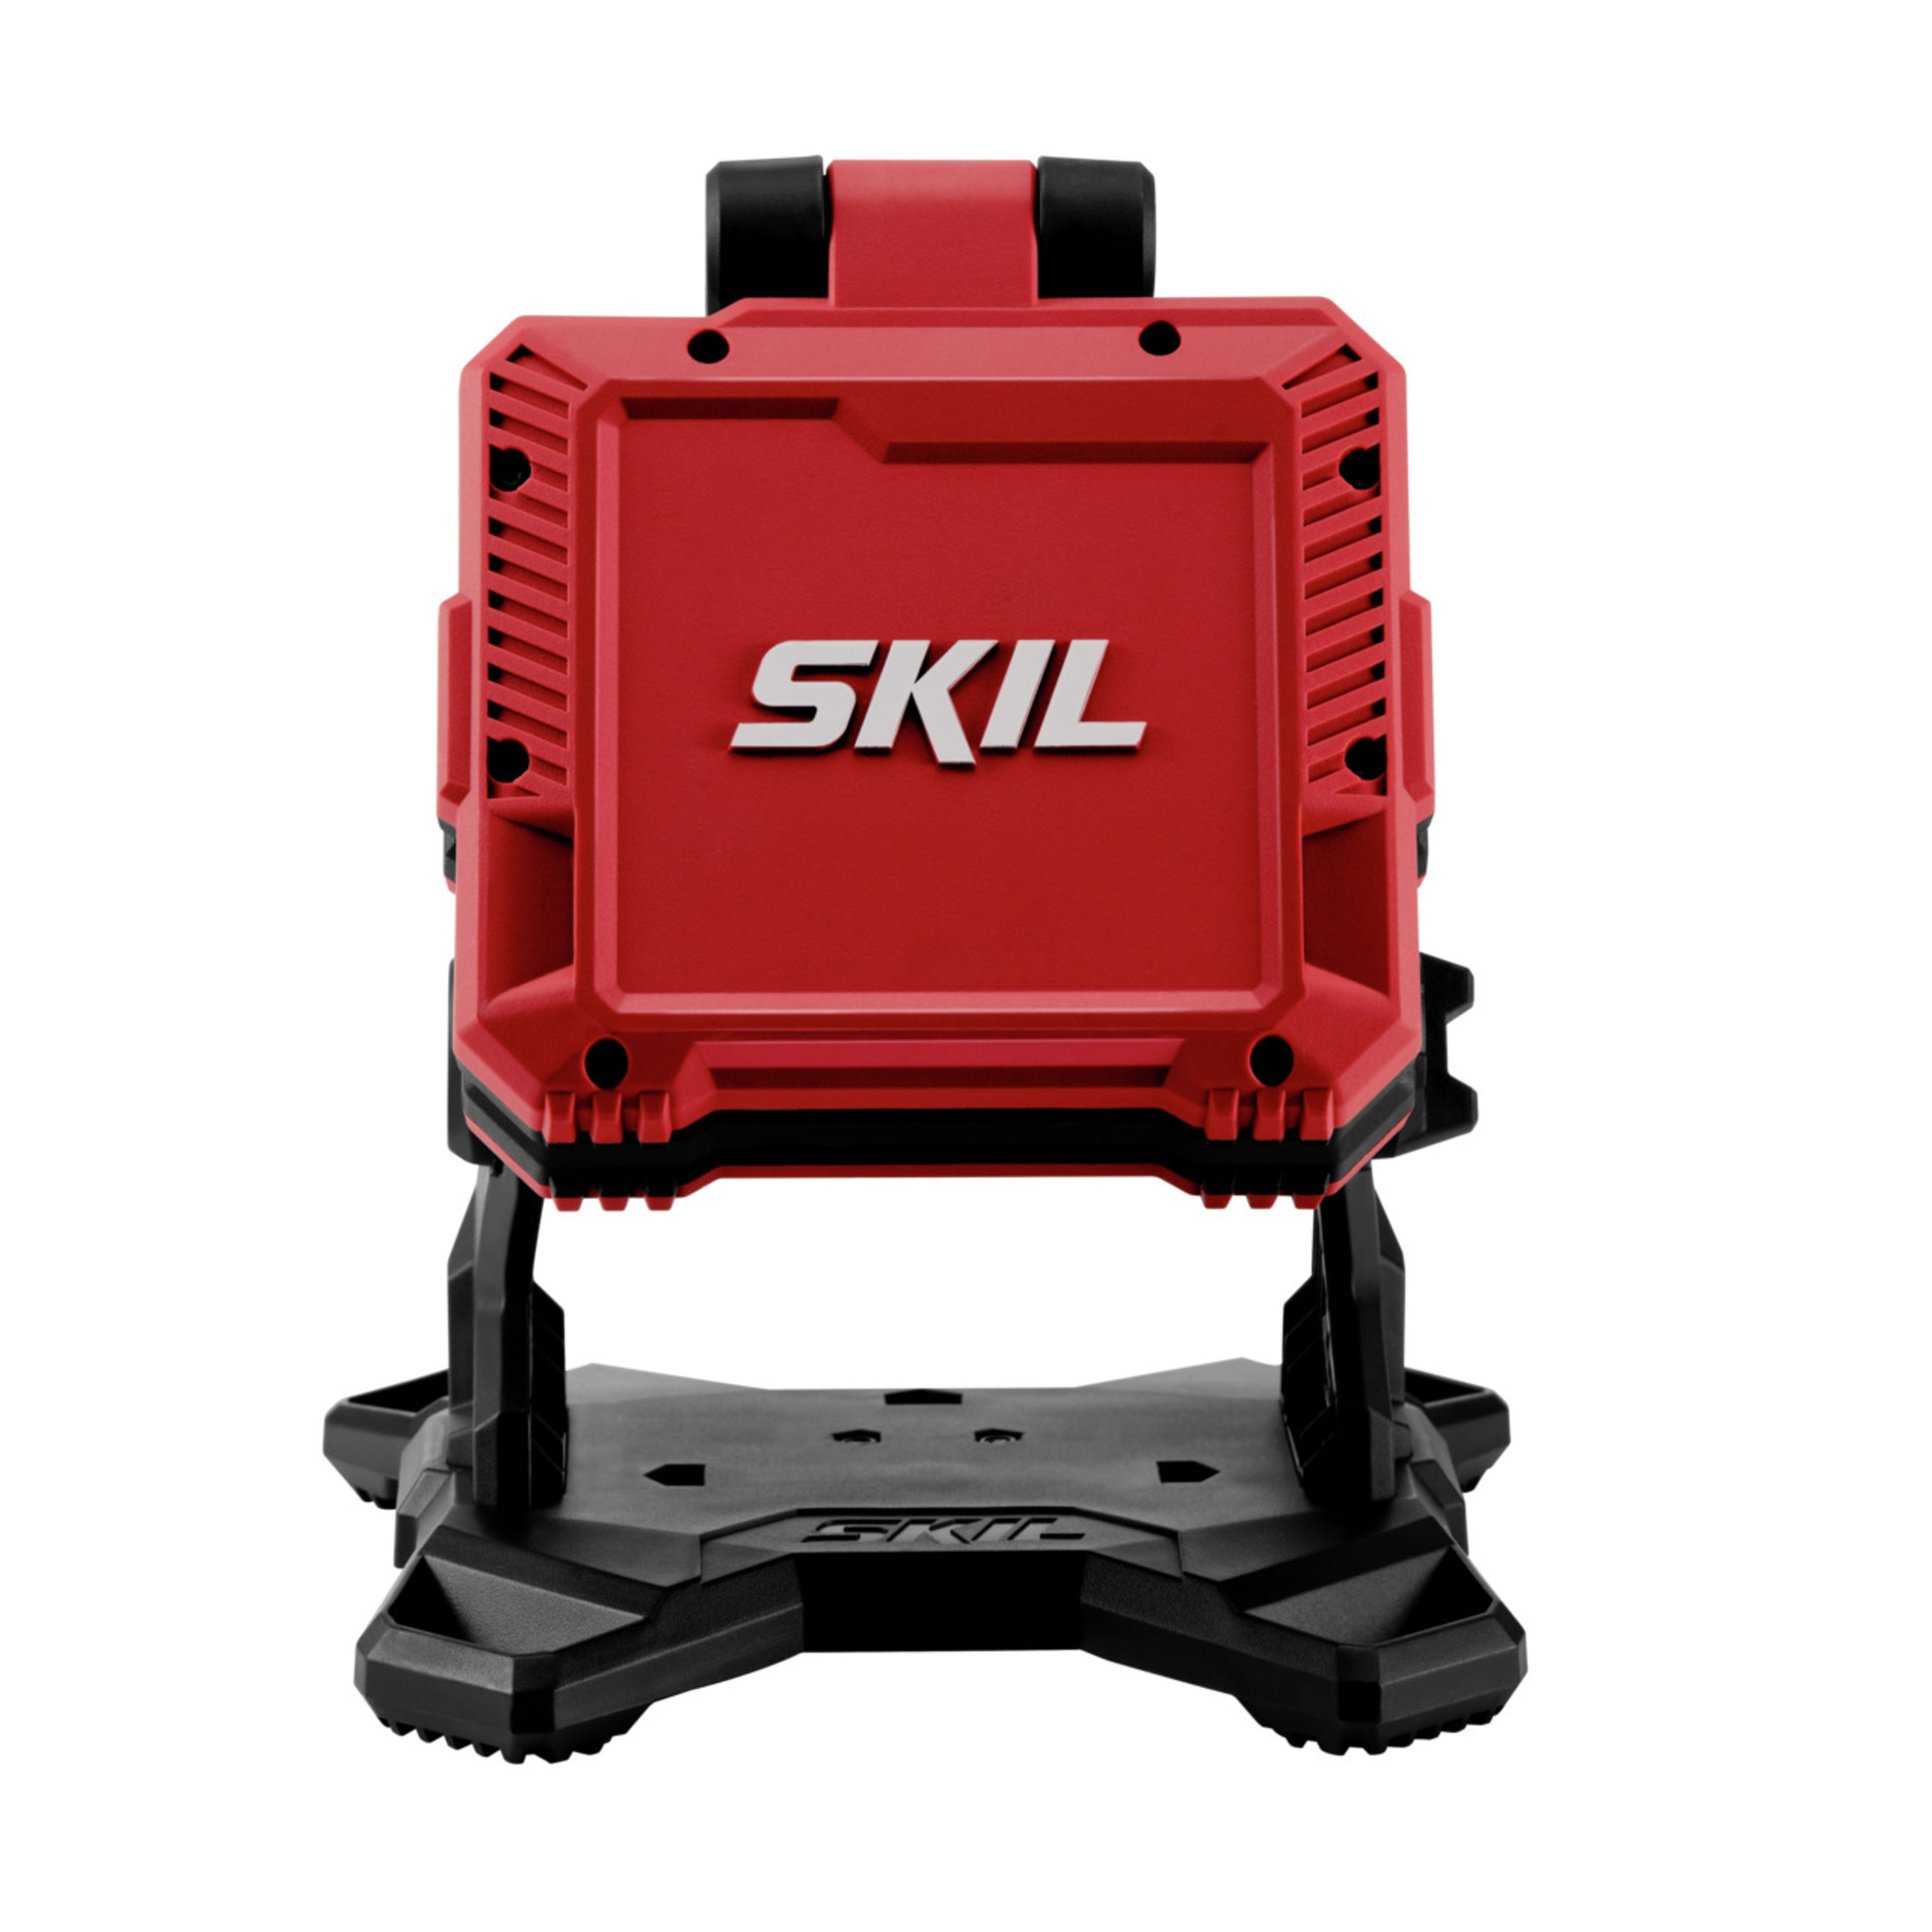 SKIL PWR CORE 20 20V Dual Head Flood Light, Tool Only, Battery and Charger  Not Included, LH5534-00